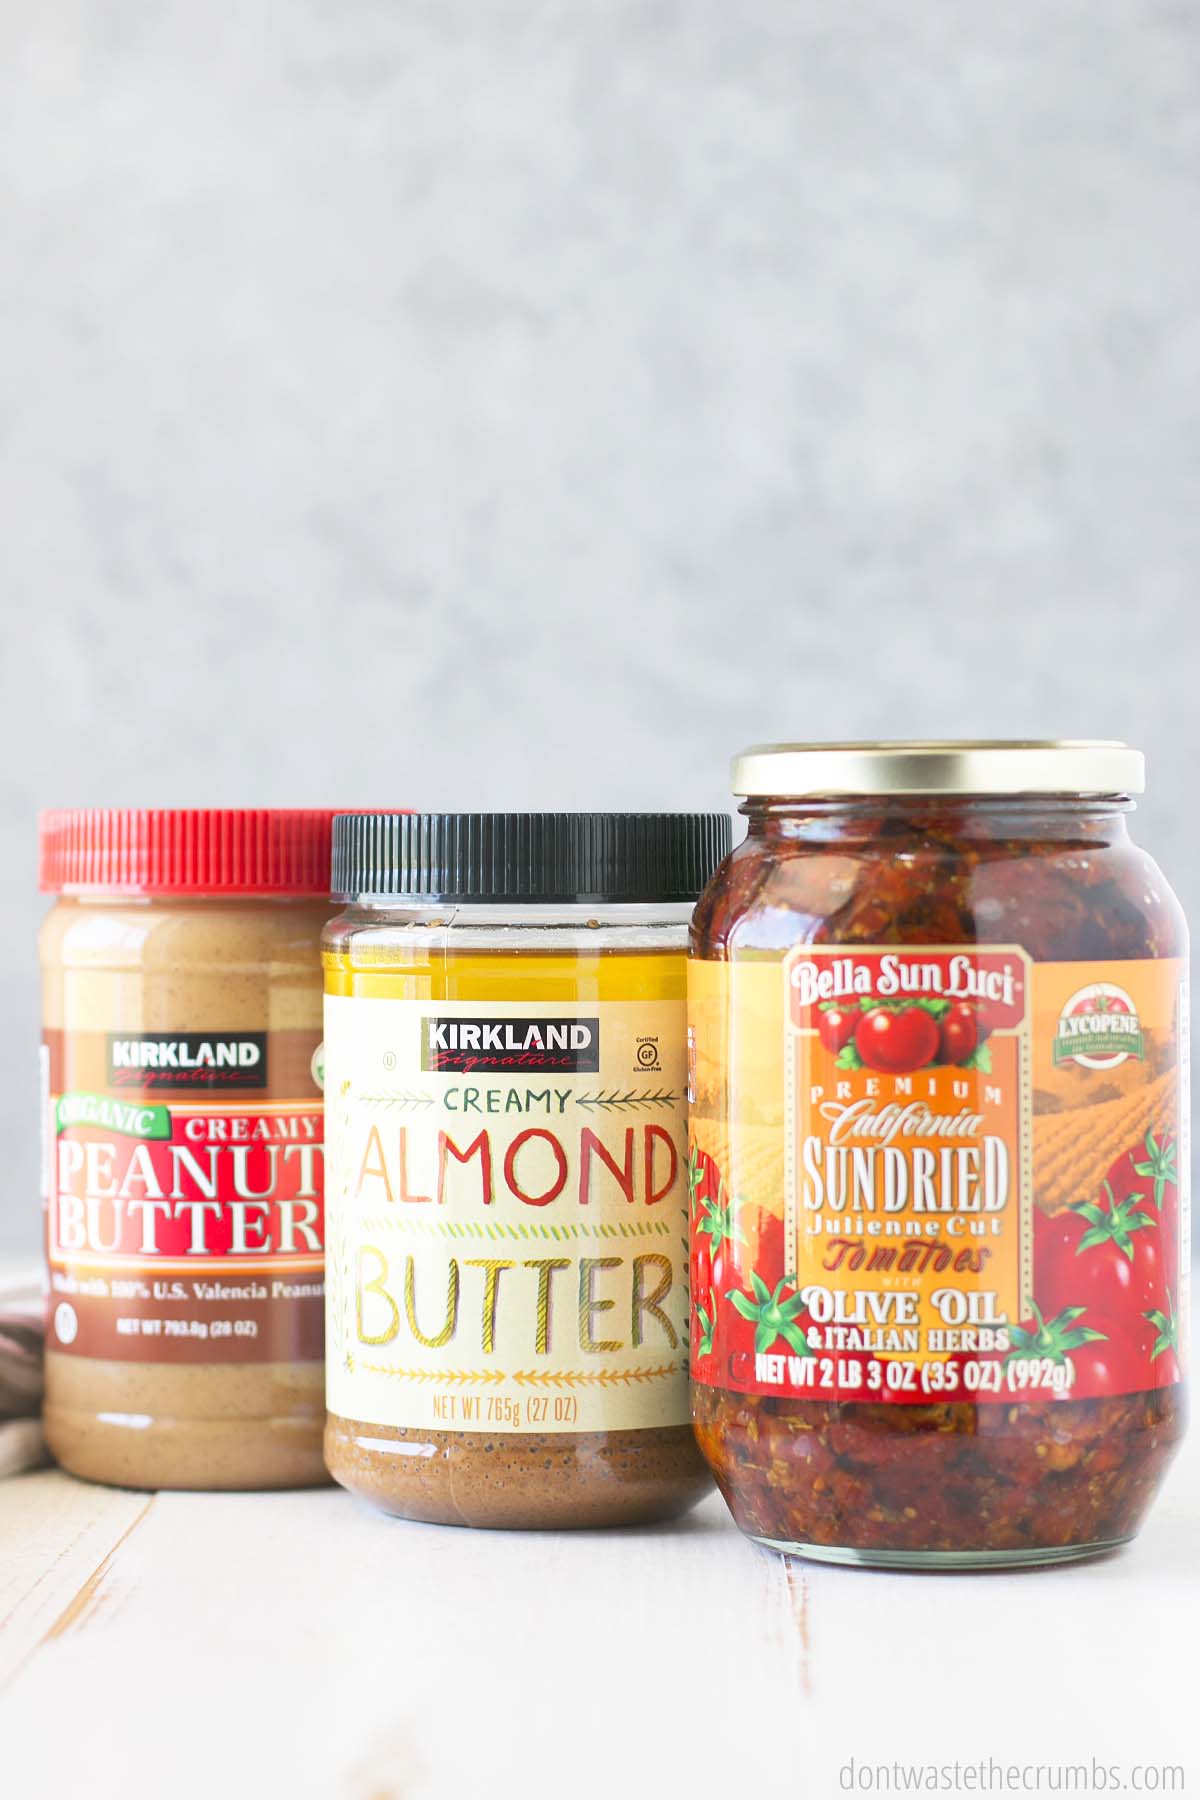 Pantry staples from Costco, including organic peanut butter, almond butter, and a jar of sun-dried tomatoes